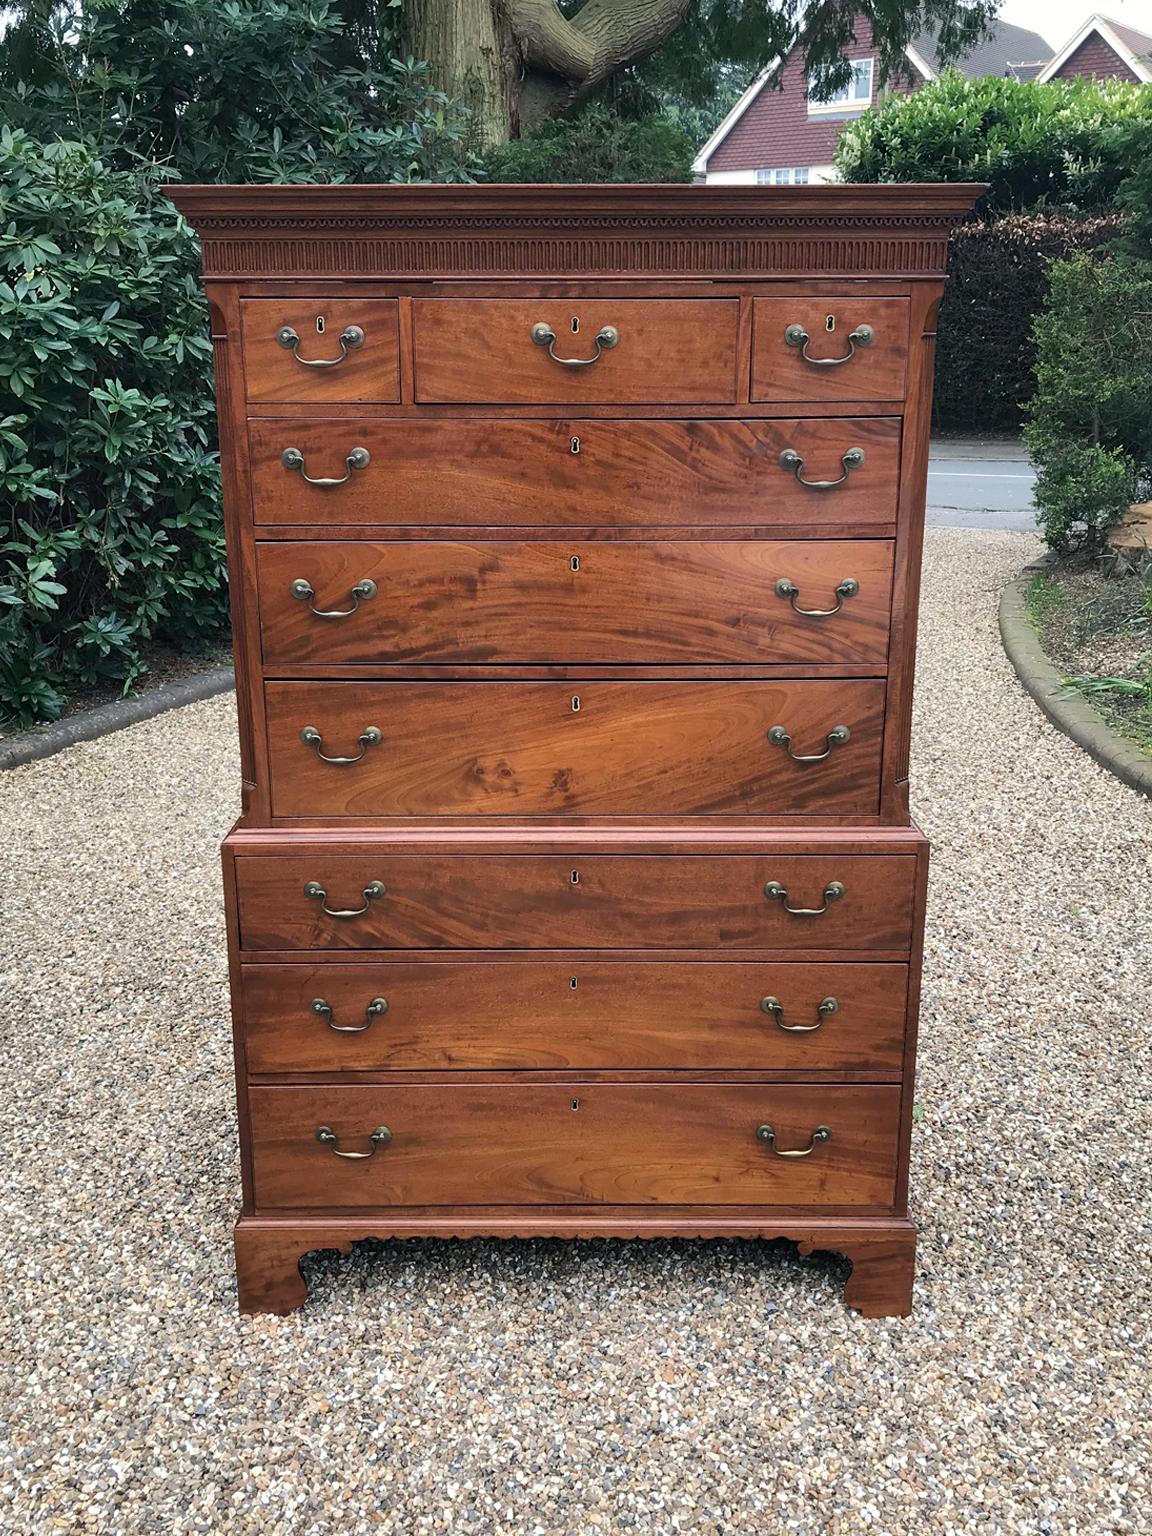 A very high quality 18th century mahogany chest on chest (Tallboy) two short drawers at the top and six long drawers. Original brass swan neck handles and solid oak lined drawers. Comes apart in three separate sections on original bracket